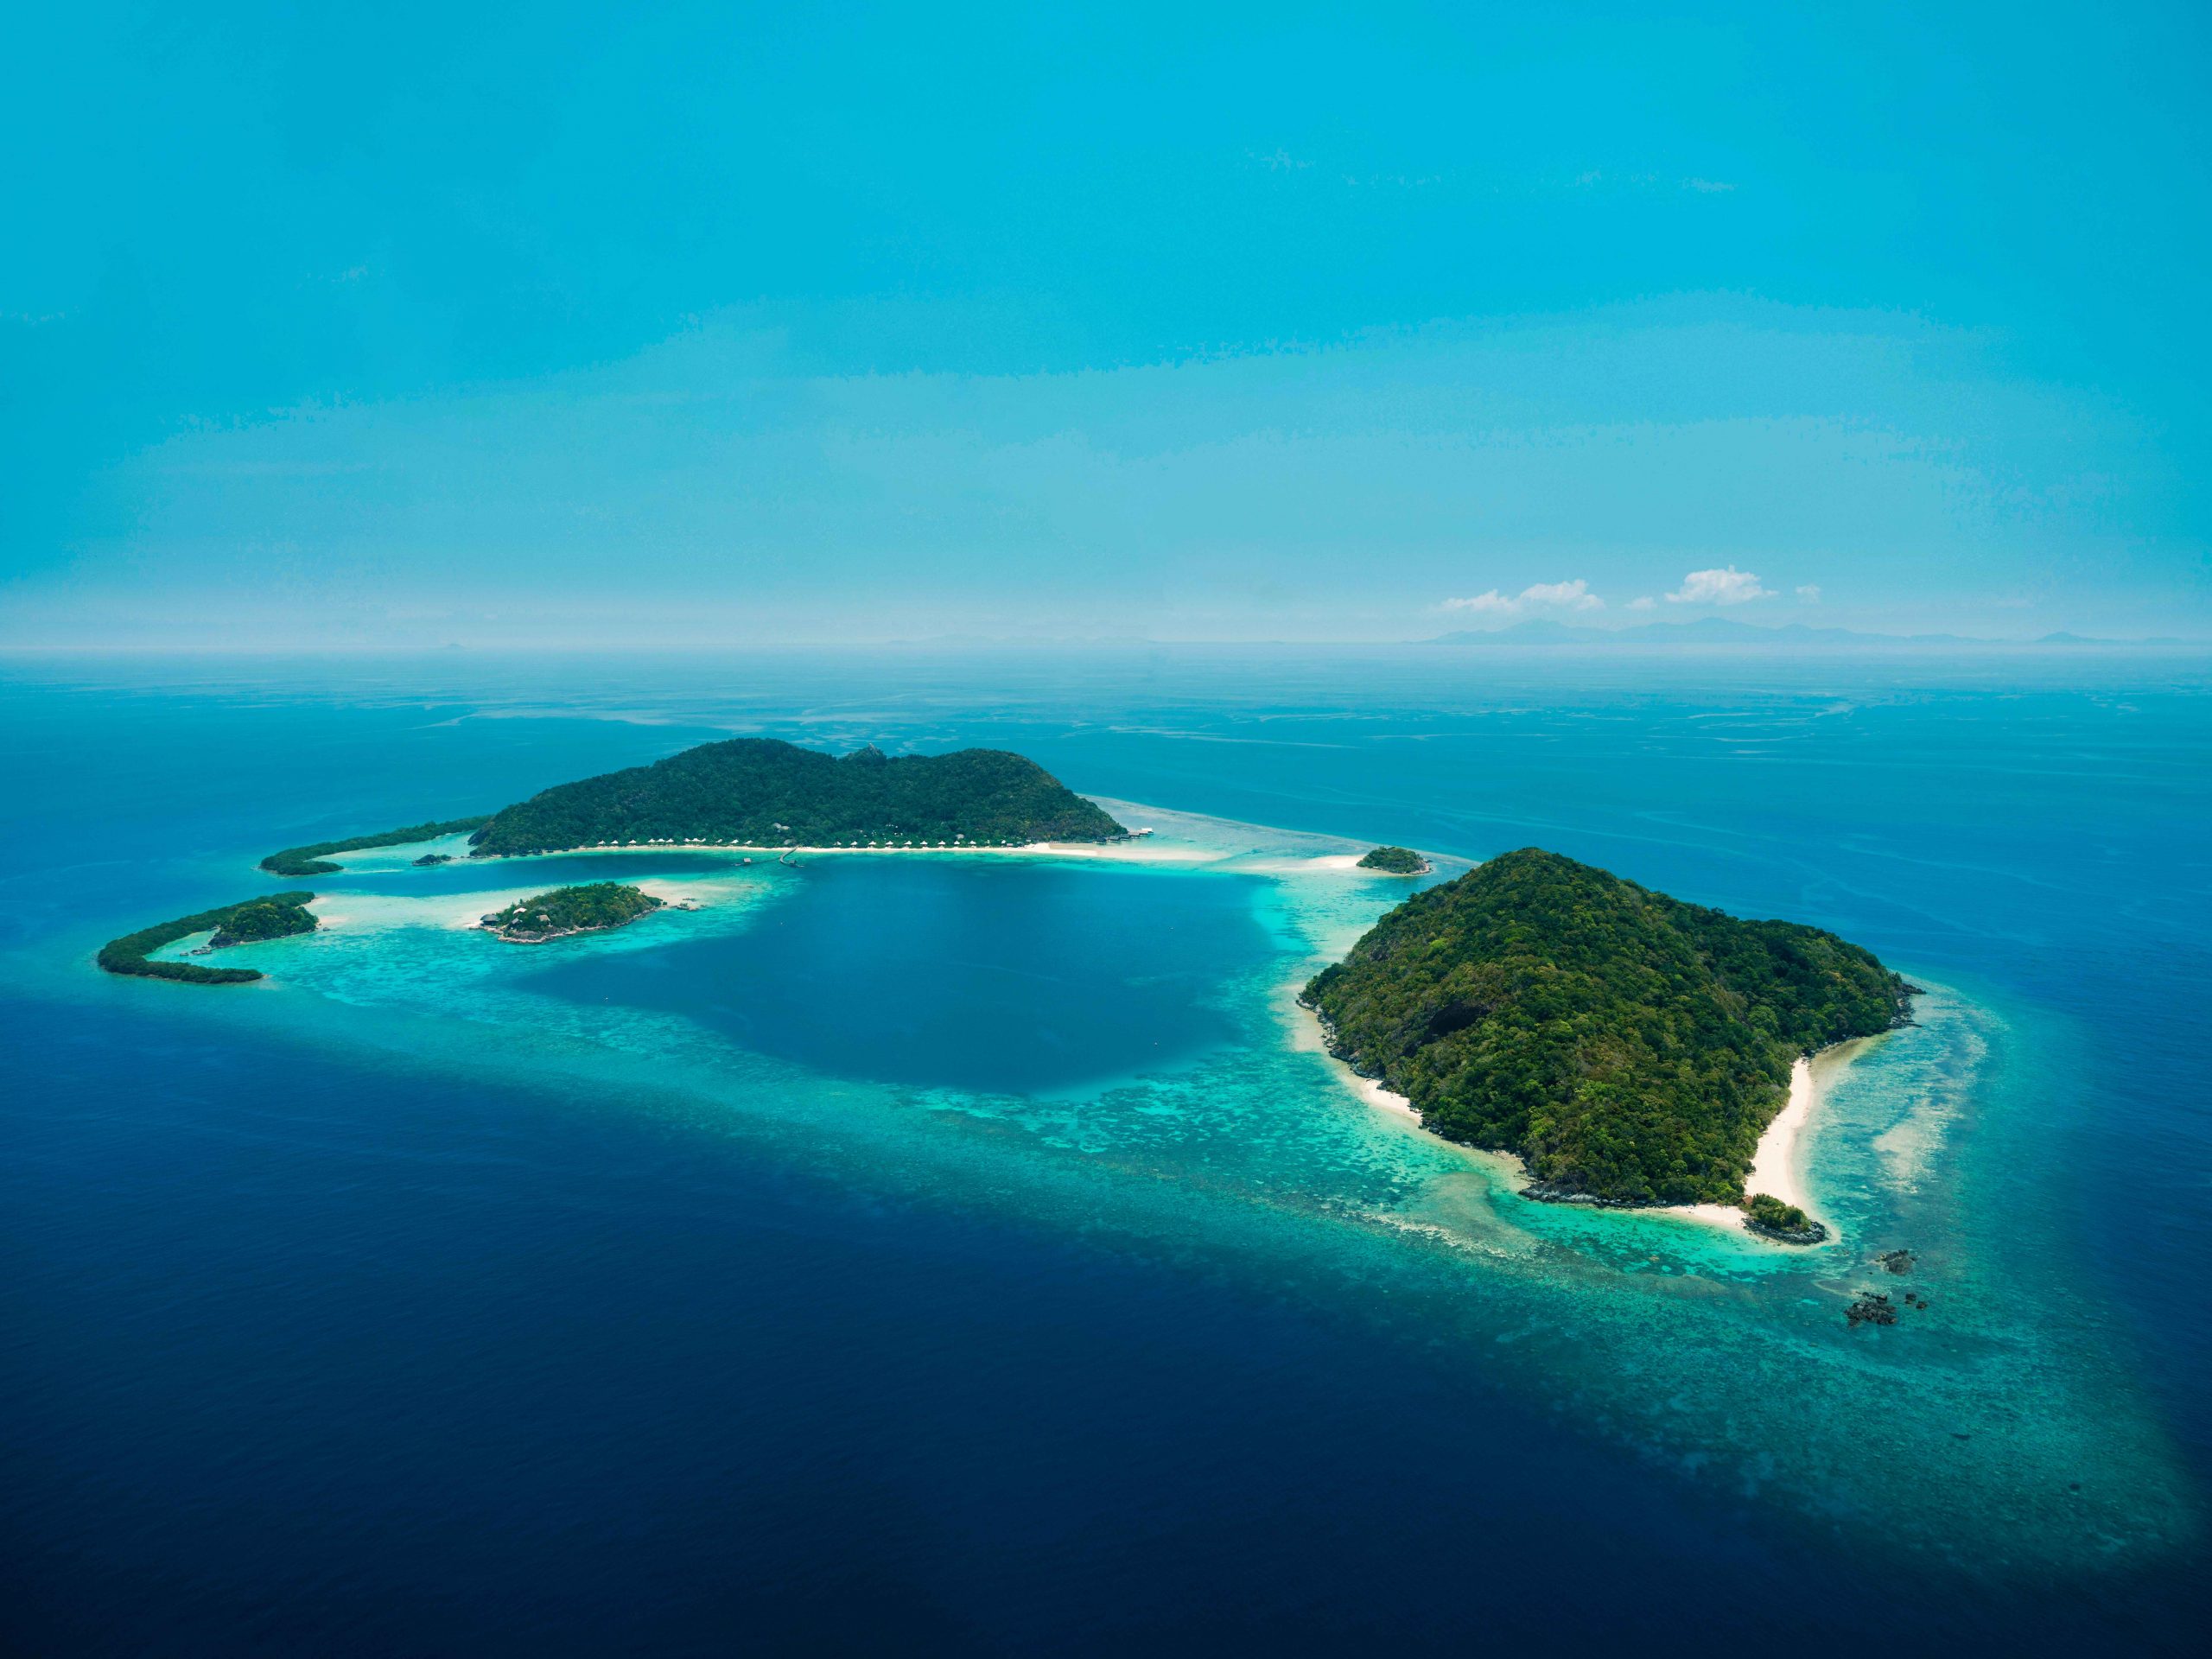 , Experience the Bawah blues in Indonesia’s Anambas archipelago